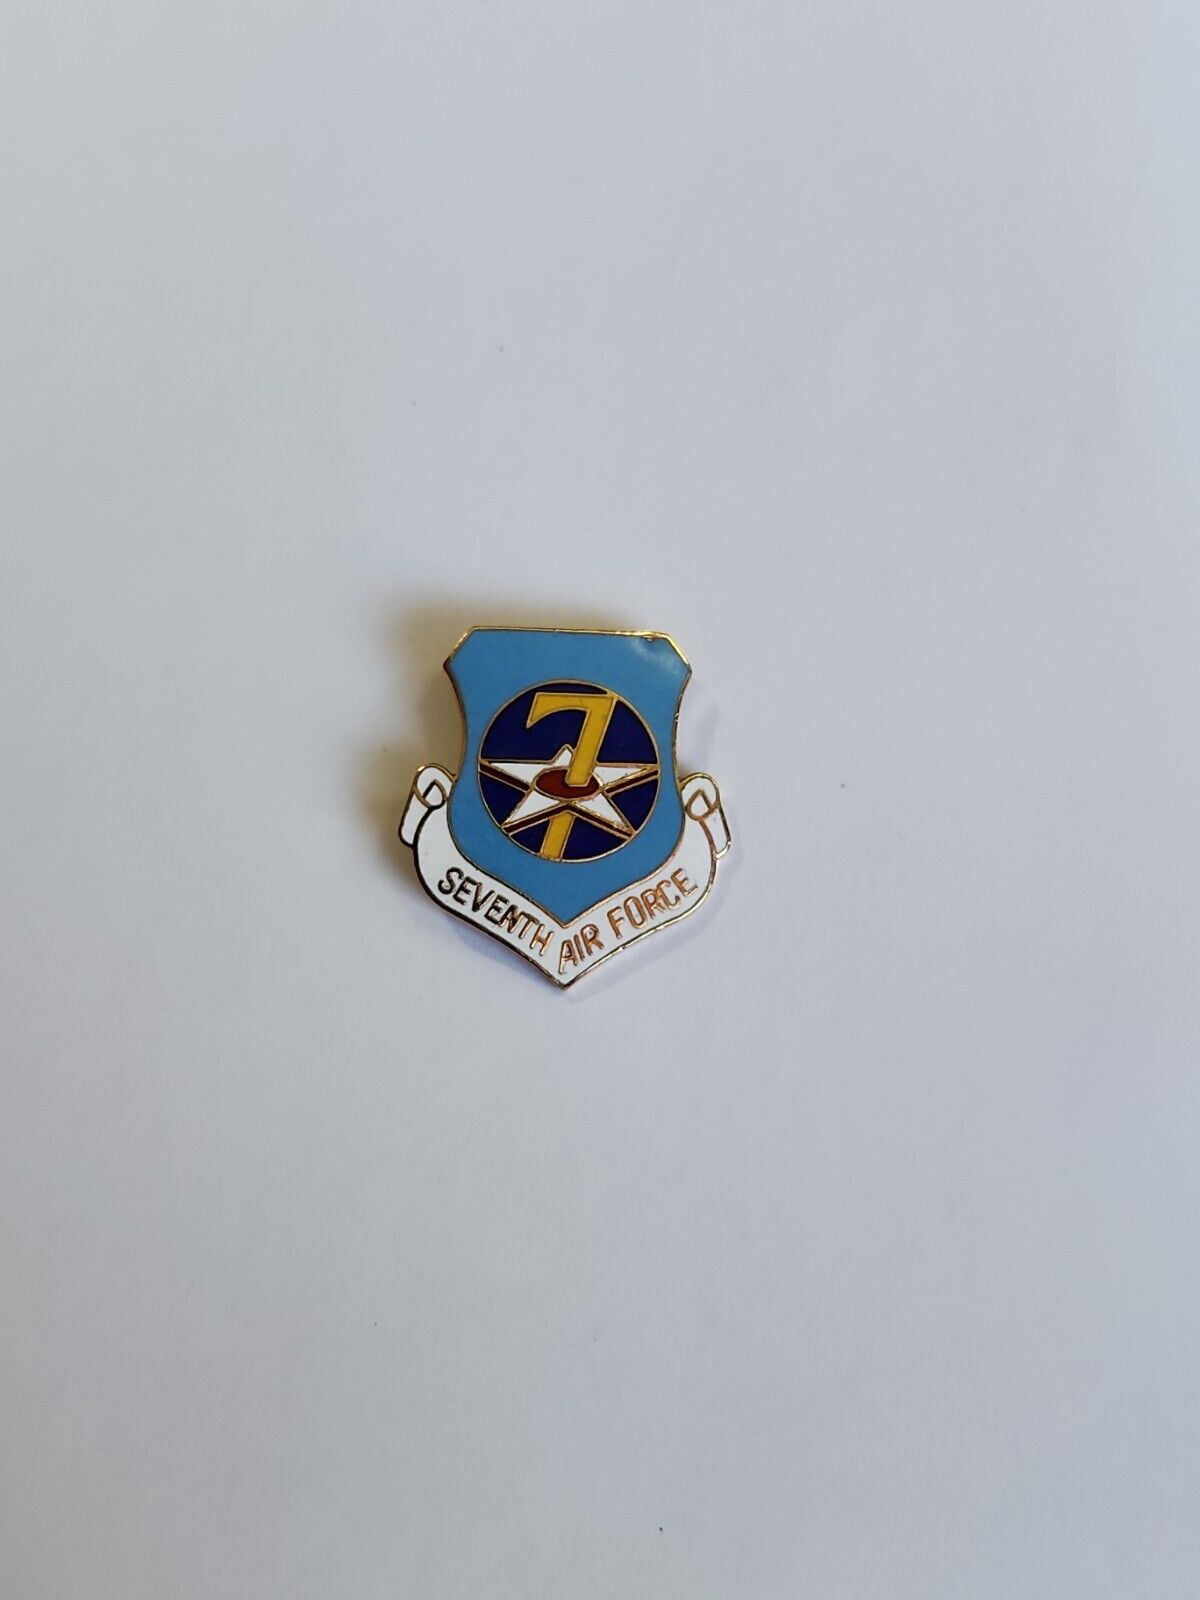 USAF Seventh Air Force Unit Crest Insignia Pin United States Air Force